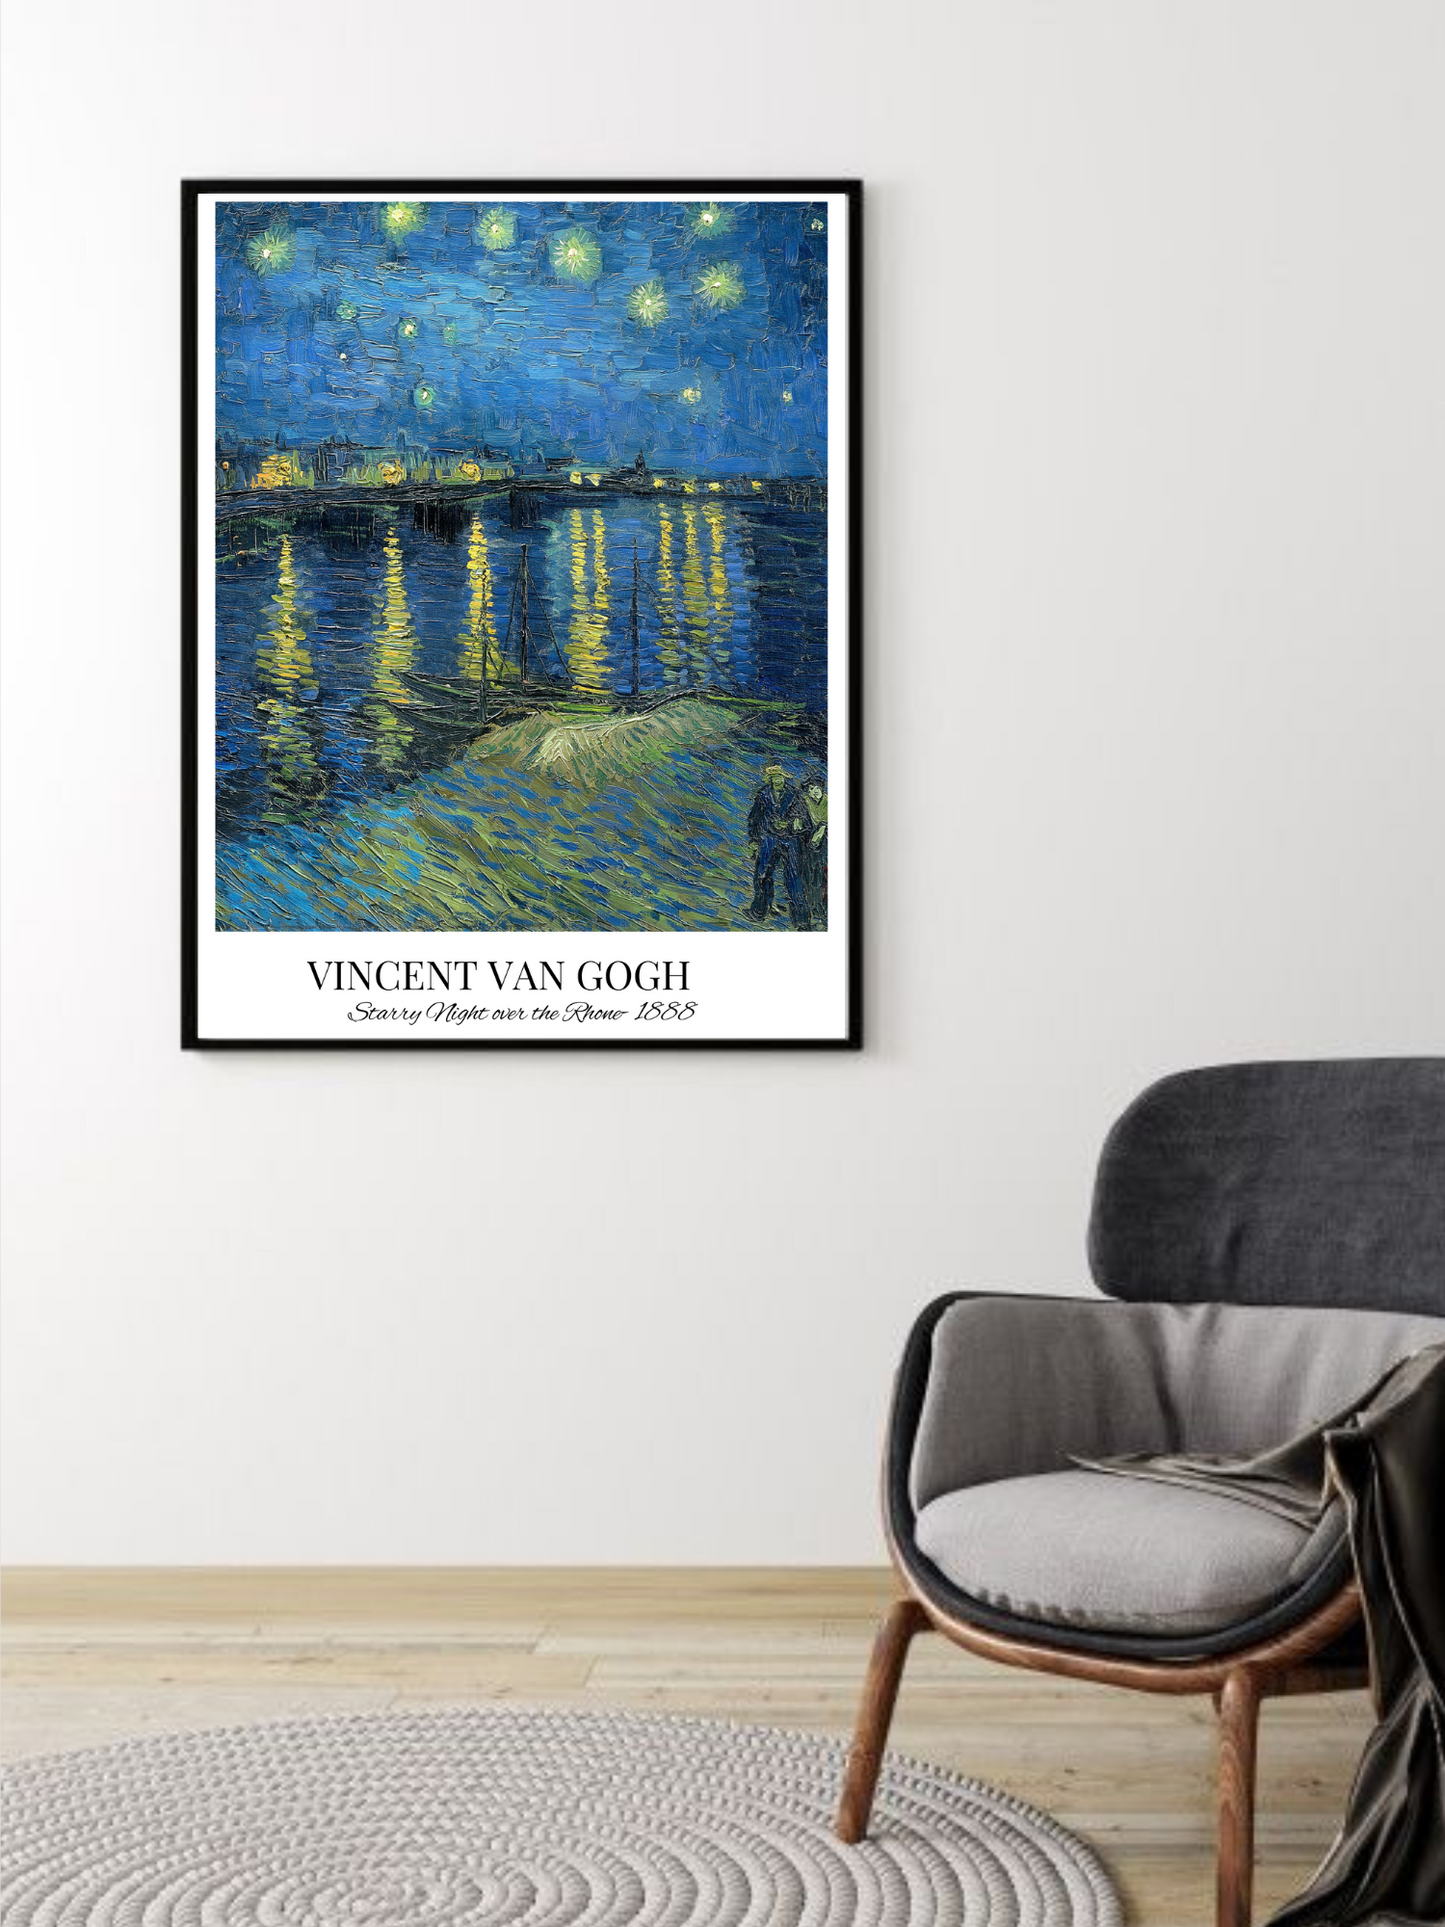 Vincent Van Gogh Starry Night at Rhone Wall Painting